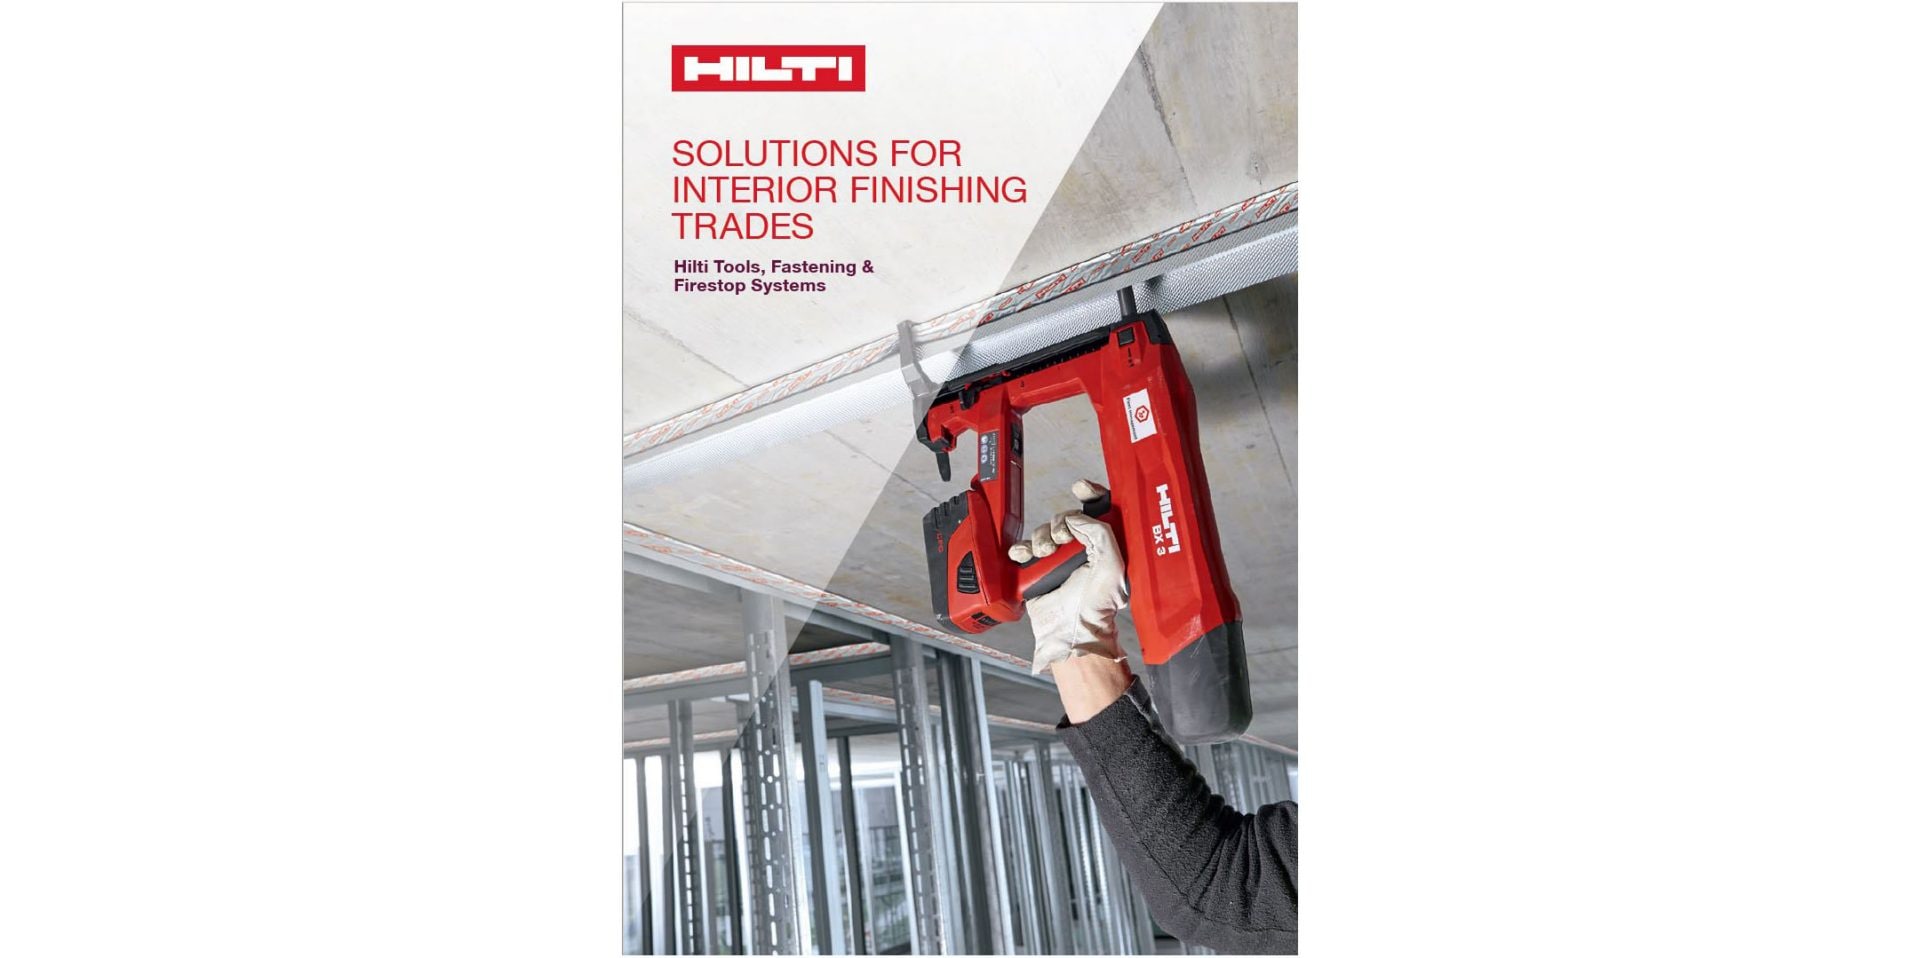 Hilti Solutions for Interior Finishing Trades